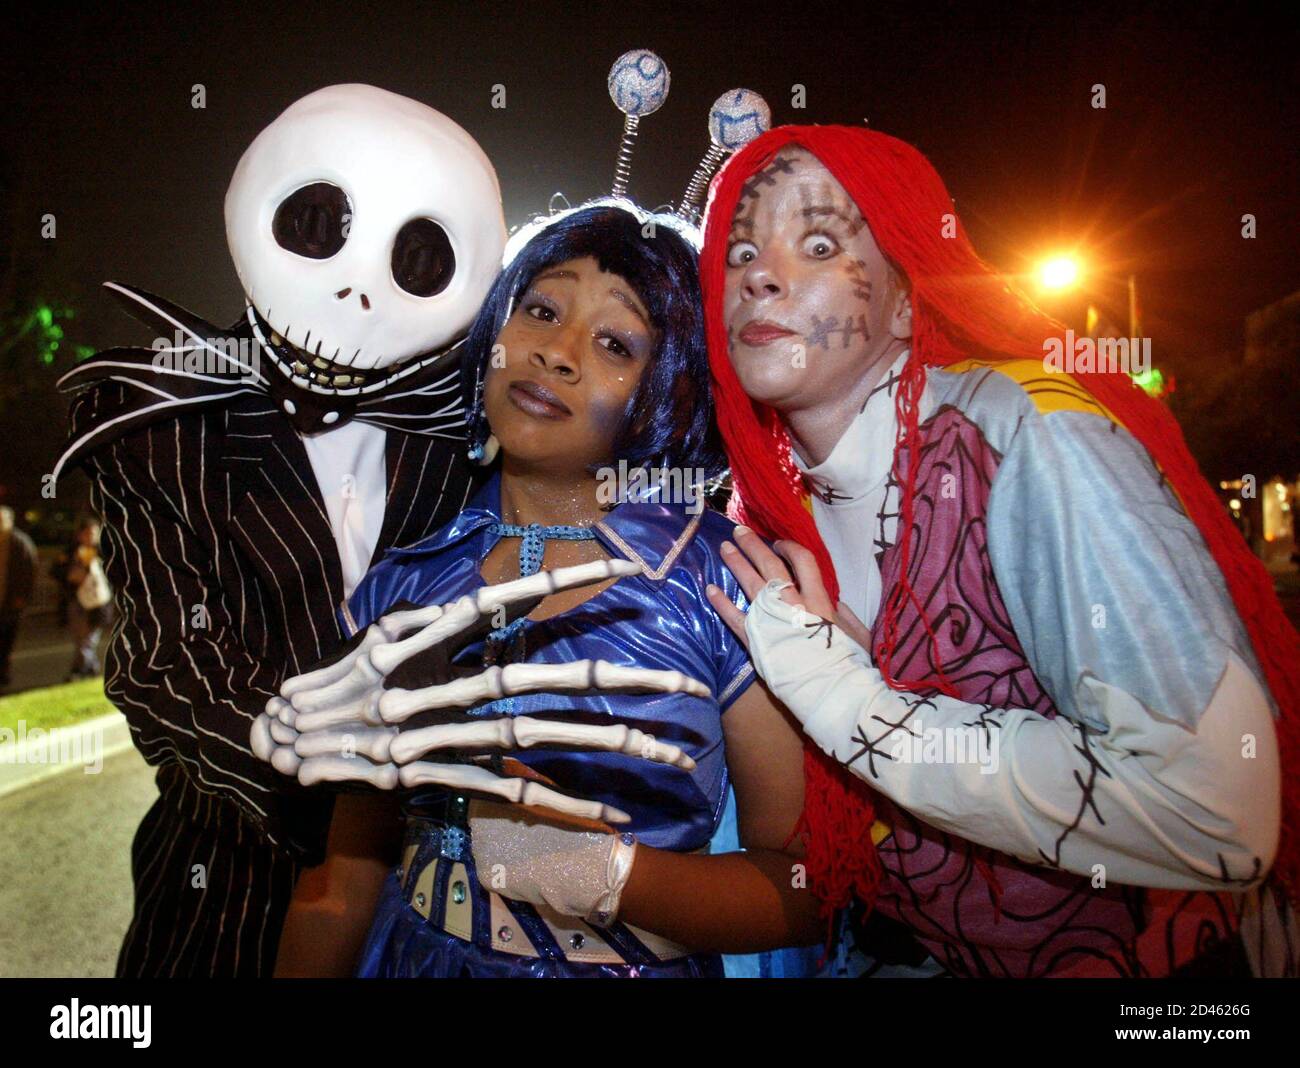 Local area Halloween revelers show off their costumes during the West  Hollywood Halloween Costume Carnaval in Los Angeles on October 31, 2002  Stock Photo - Alamy